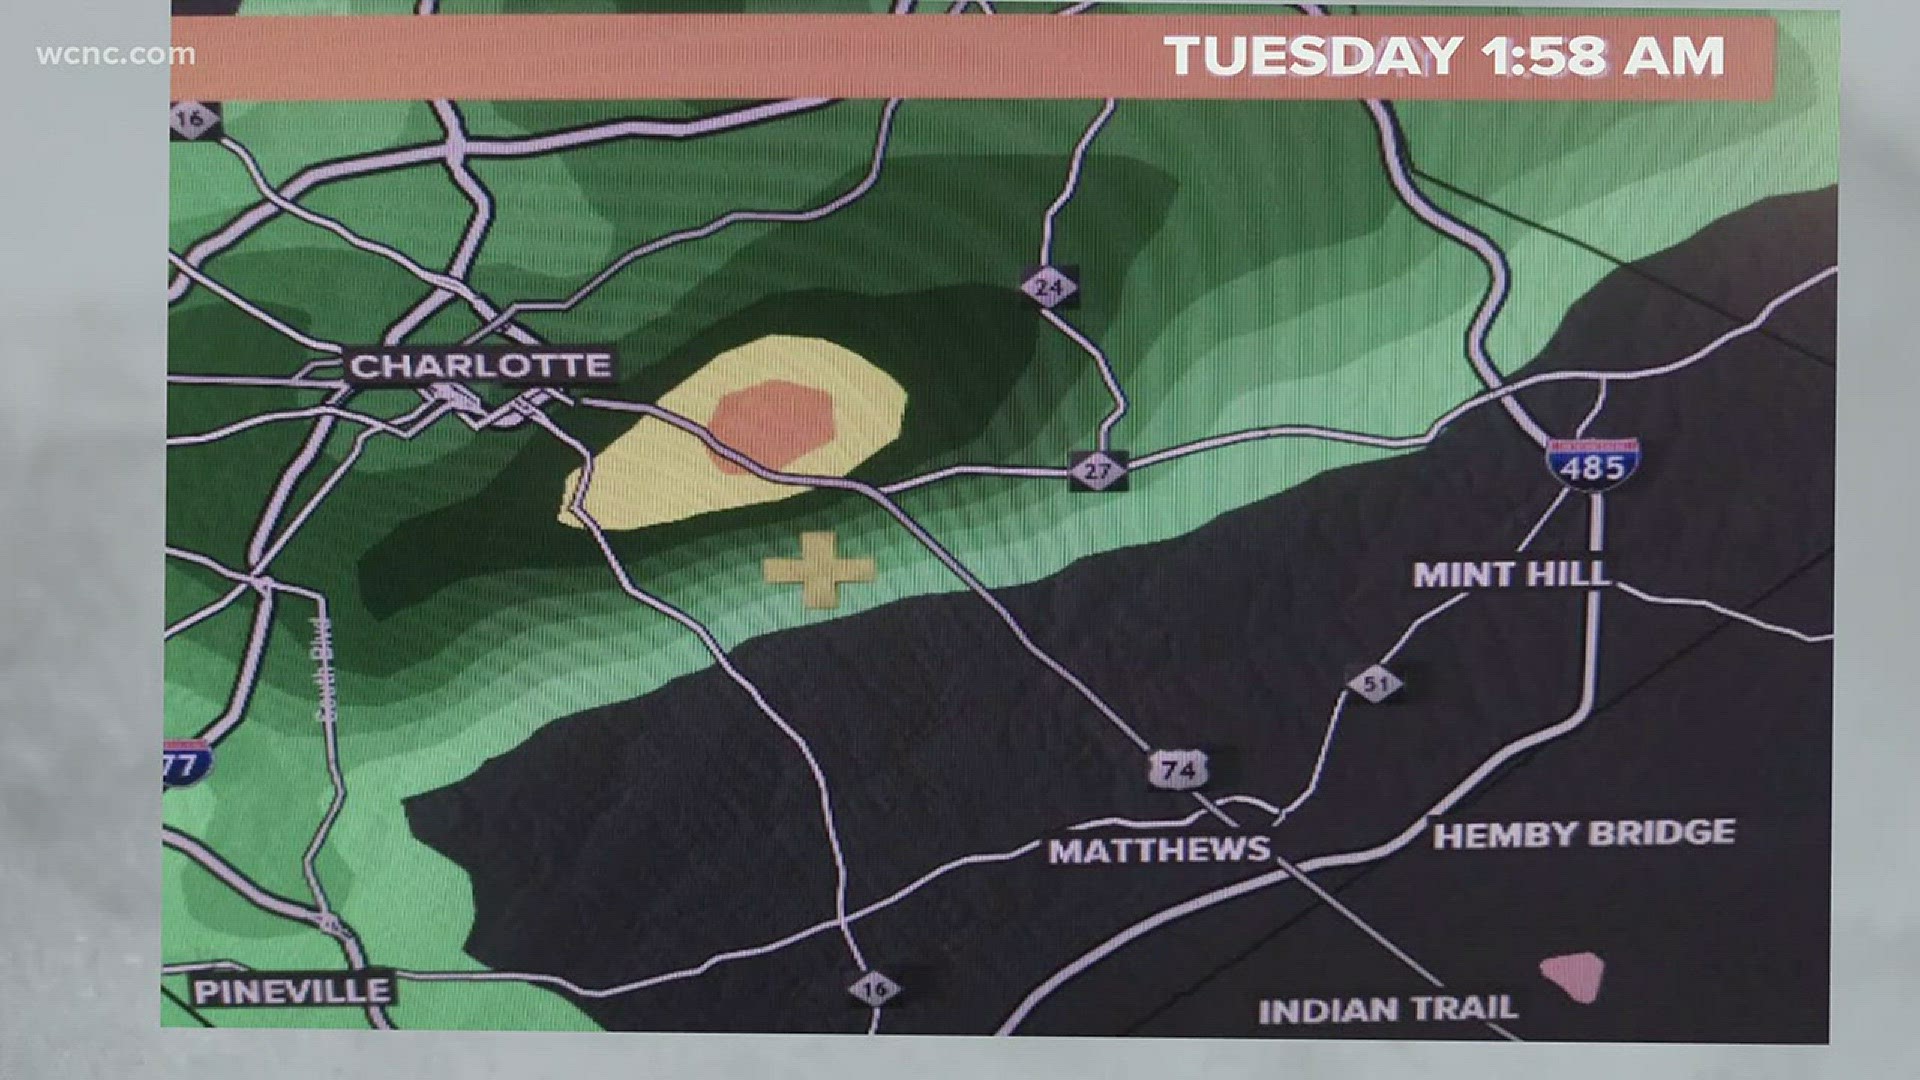 Hundreds of people across the Charlotte area were awoken by a loud boom of thunder early Tuesday morning.